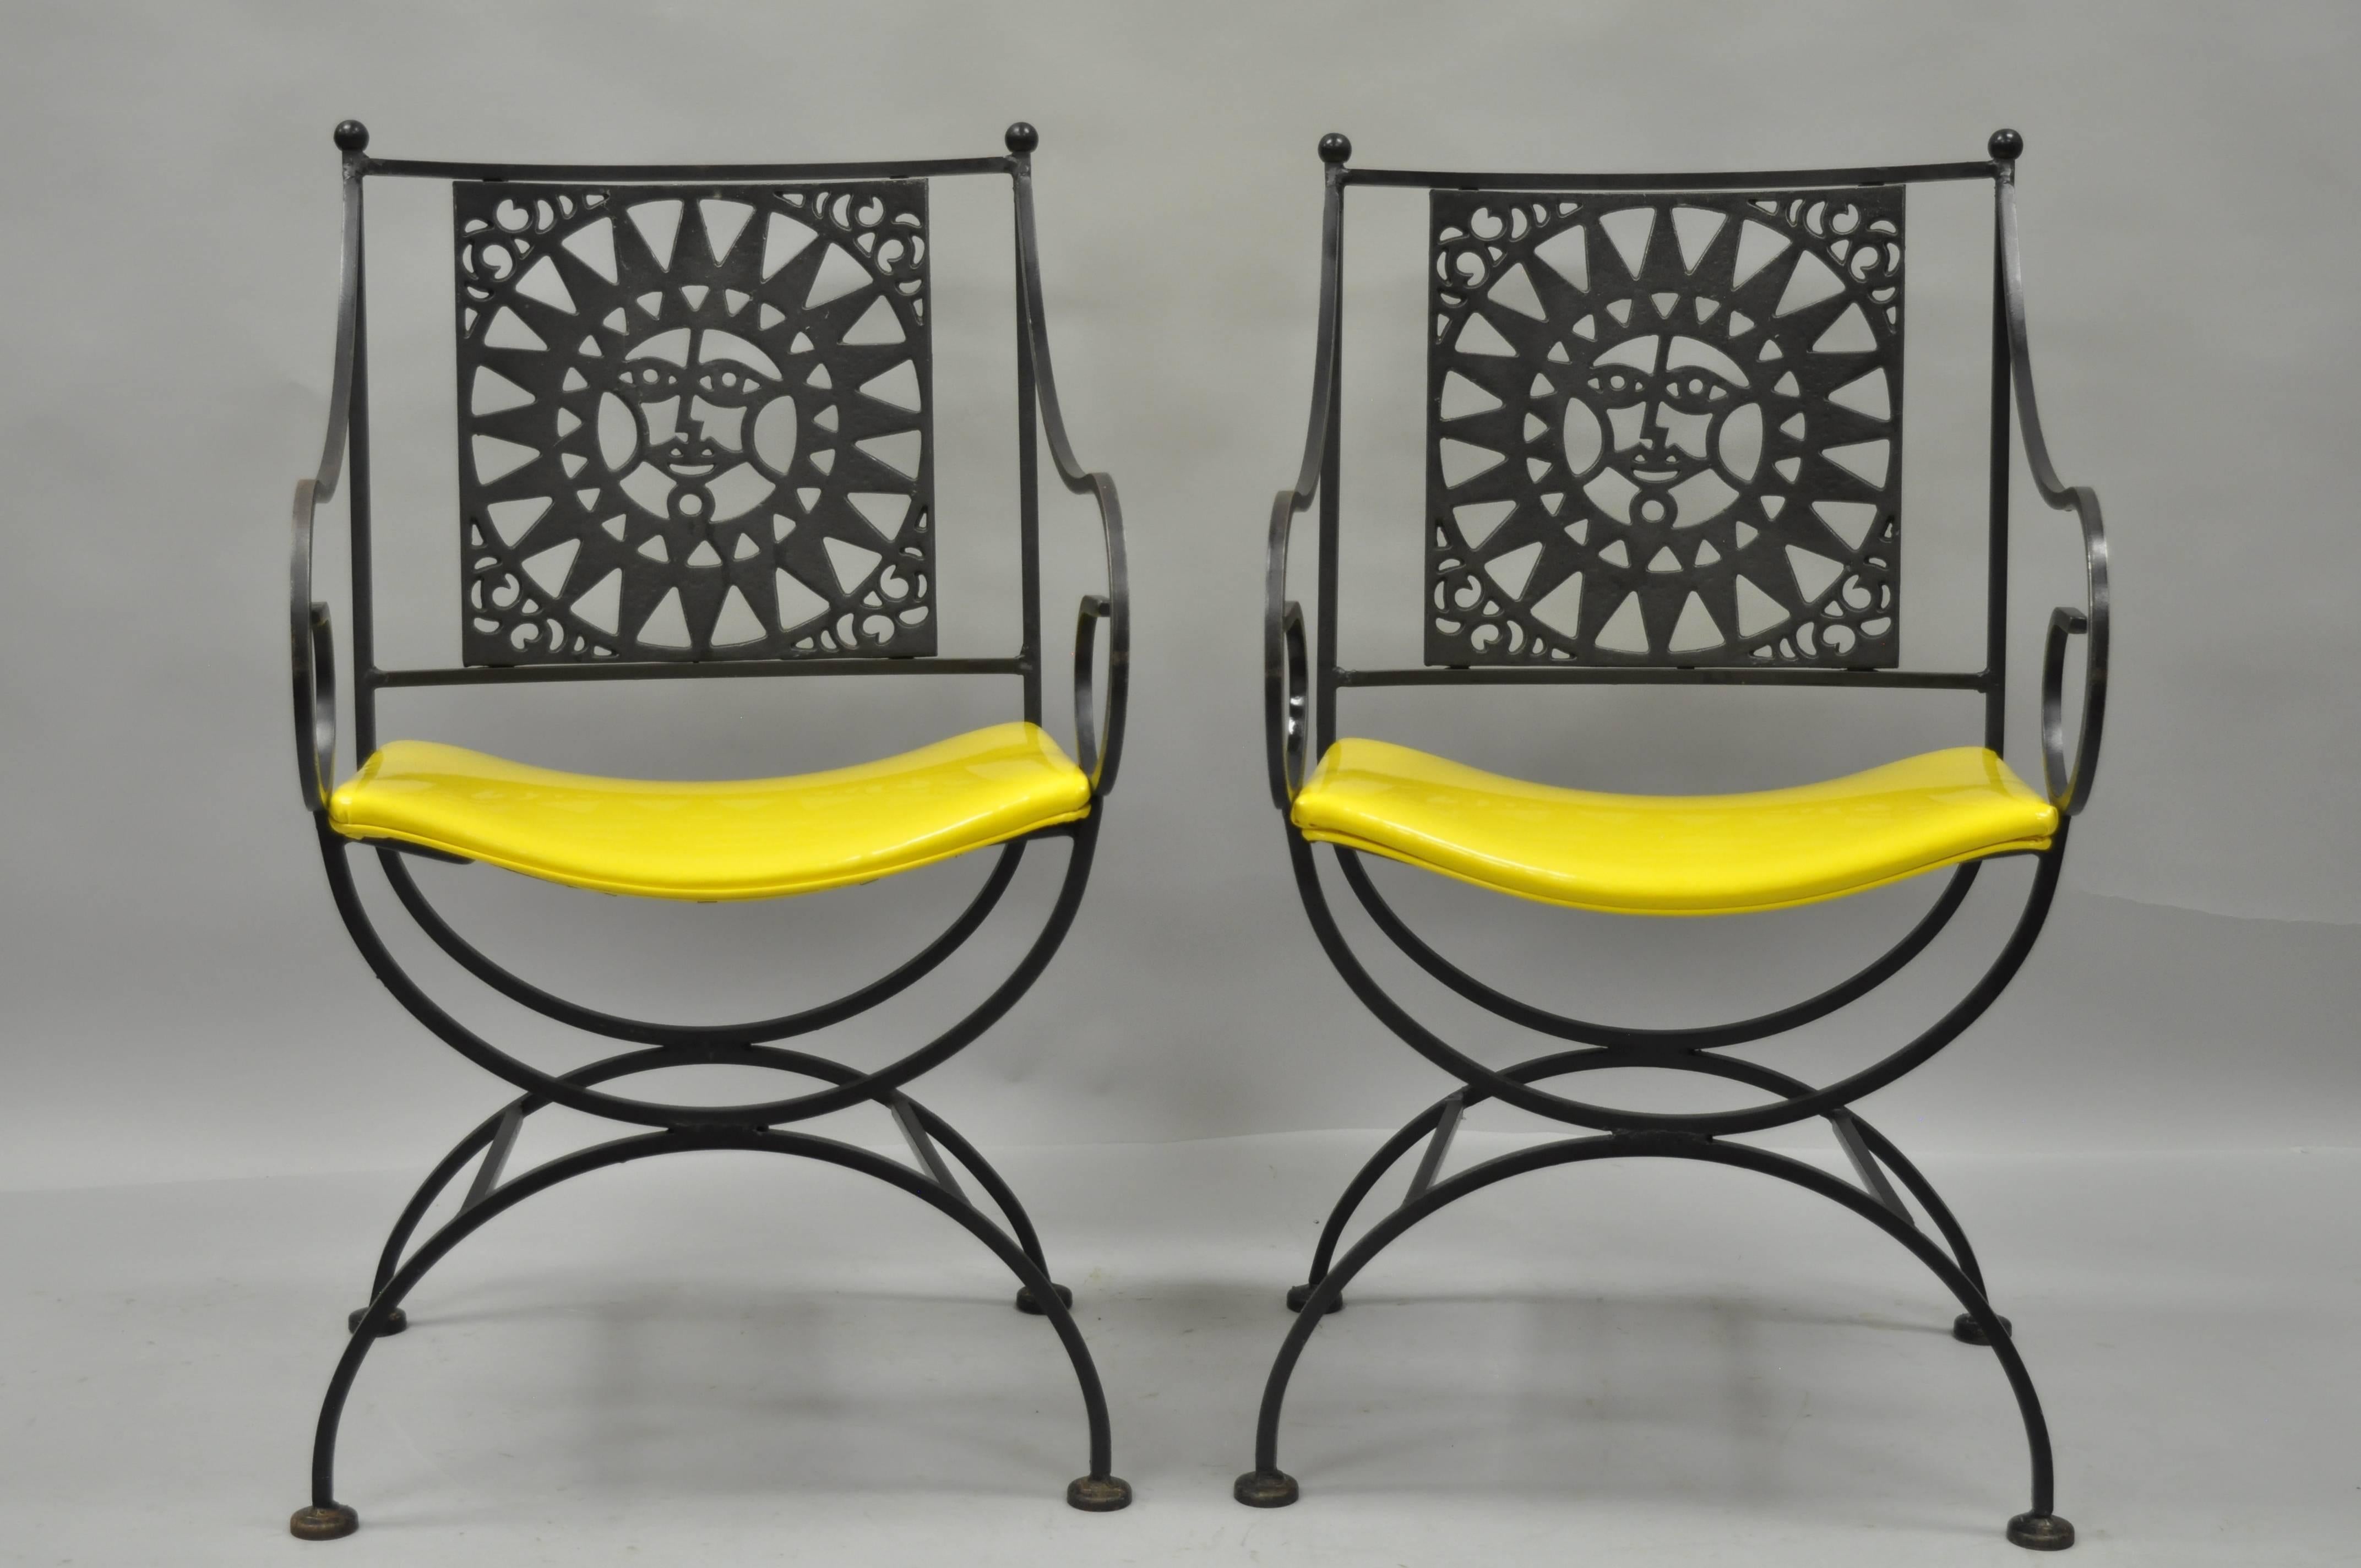 Pair of vintage Mid-Century Modern, 1960s wrought iron directors chairs with sun backs from the Mayan Collection by Arthur Umanoff. This wonderful pair of handcrafted chairs features unique X-form bases, ball form finials, whimsically scrolled arms,